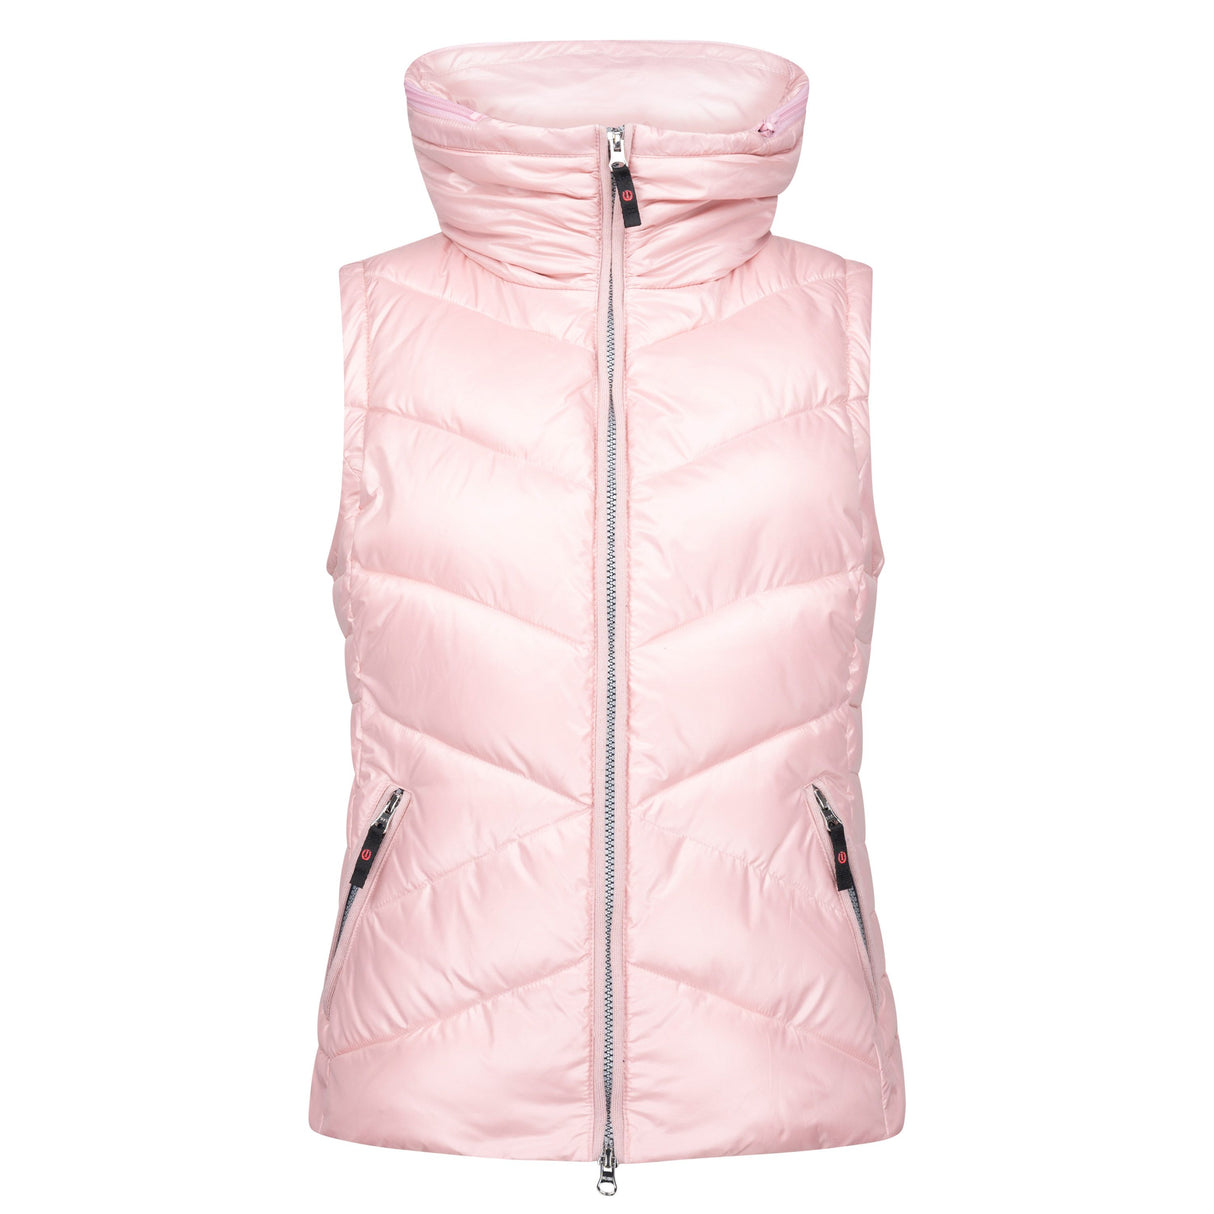 Imperial Riding Inspirational Star Bodywarmer #colour_classy-pink